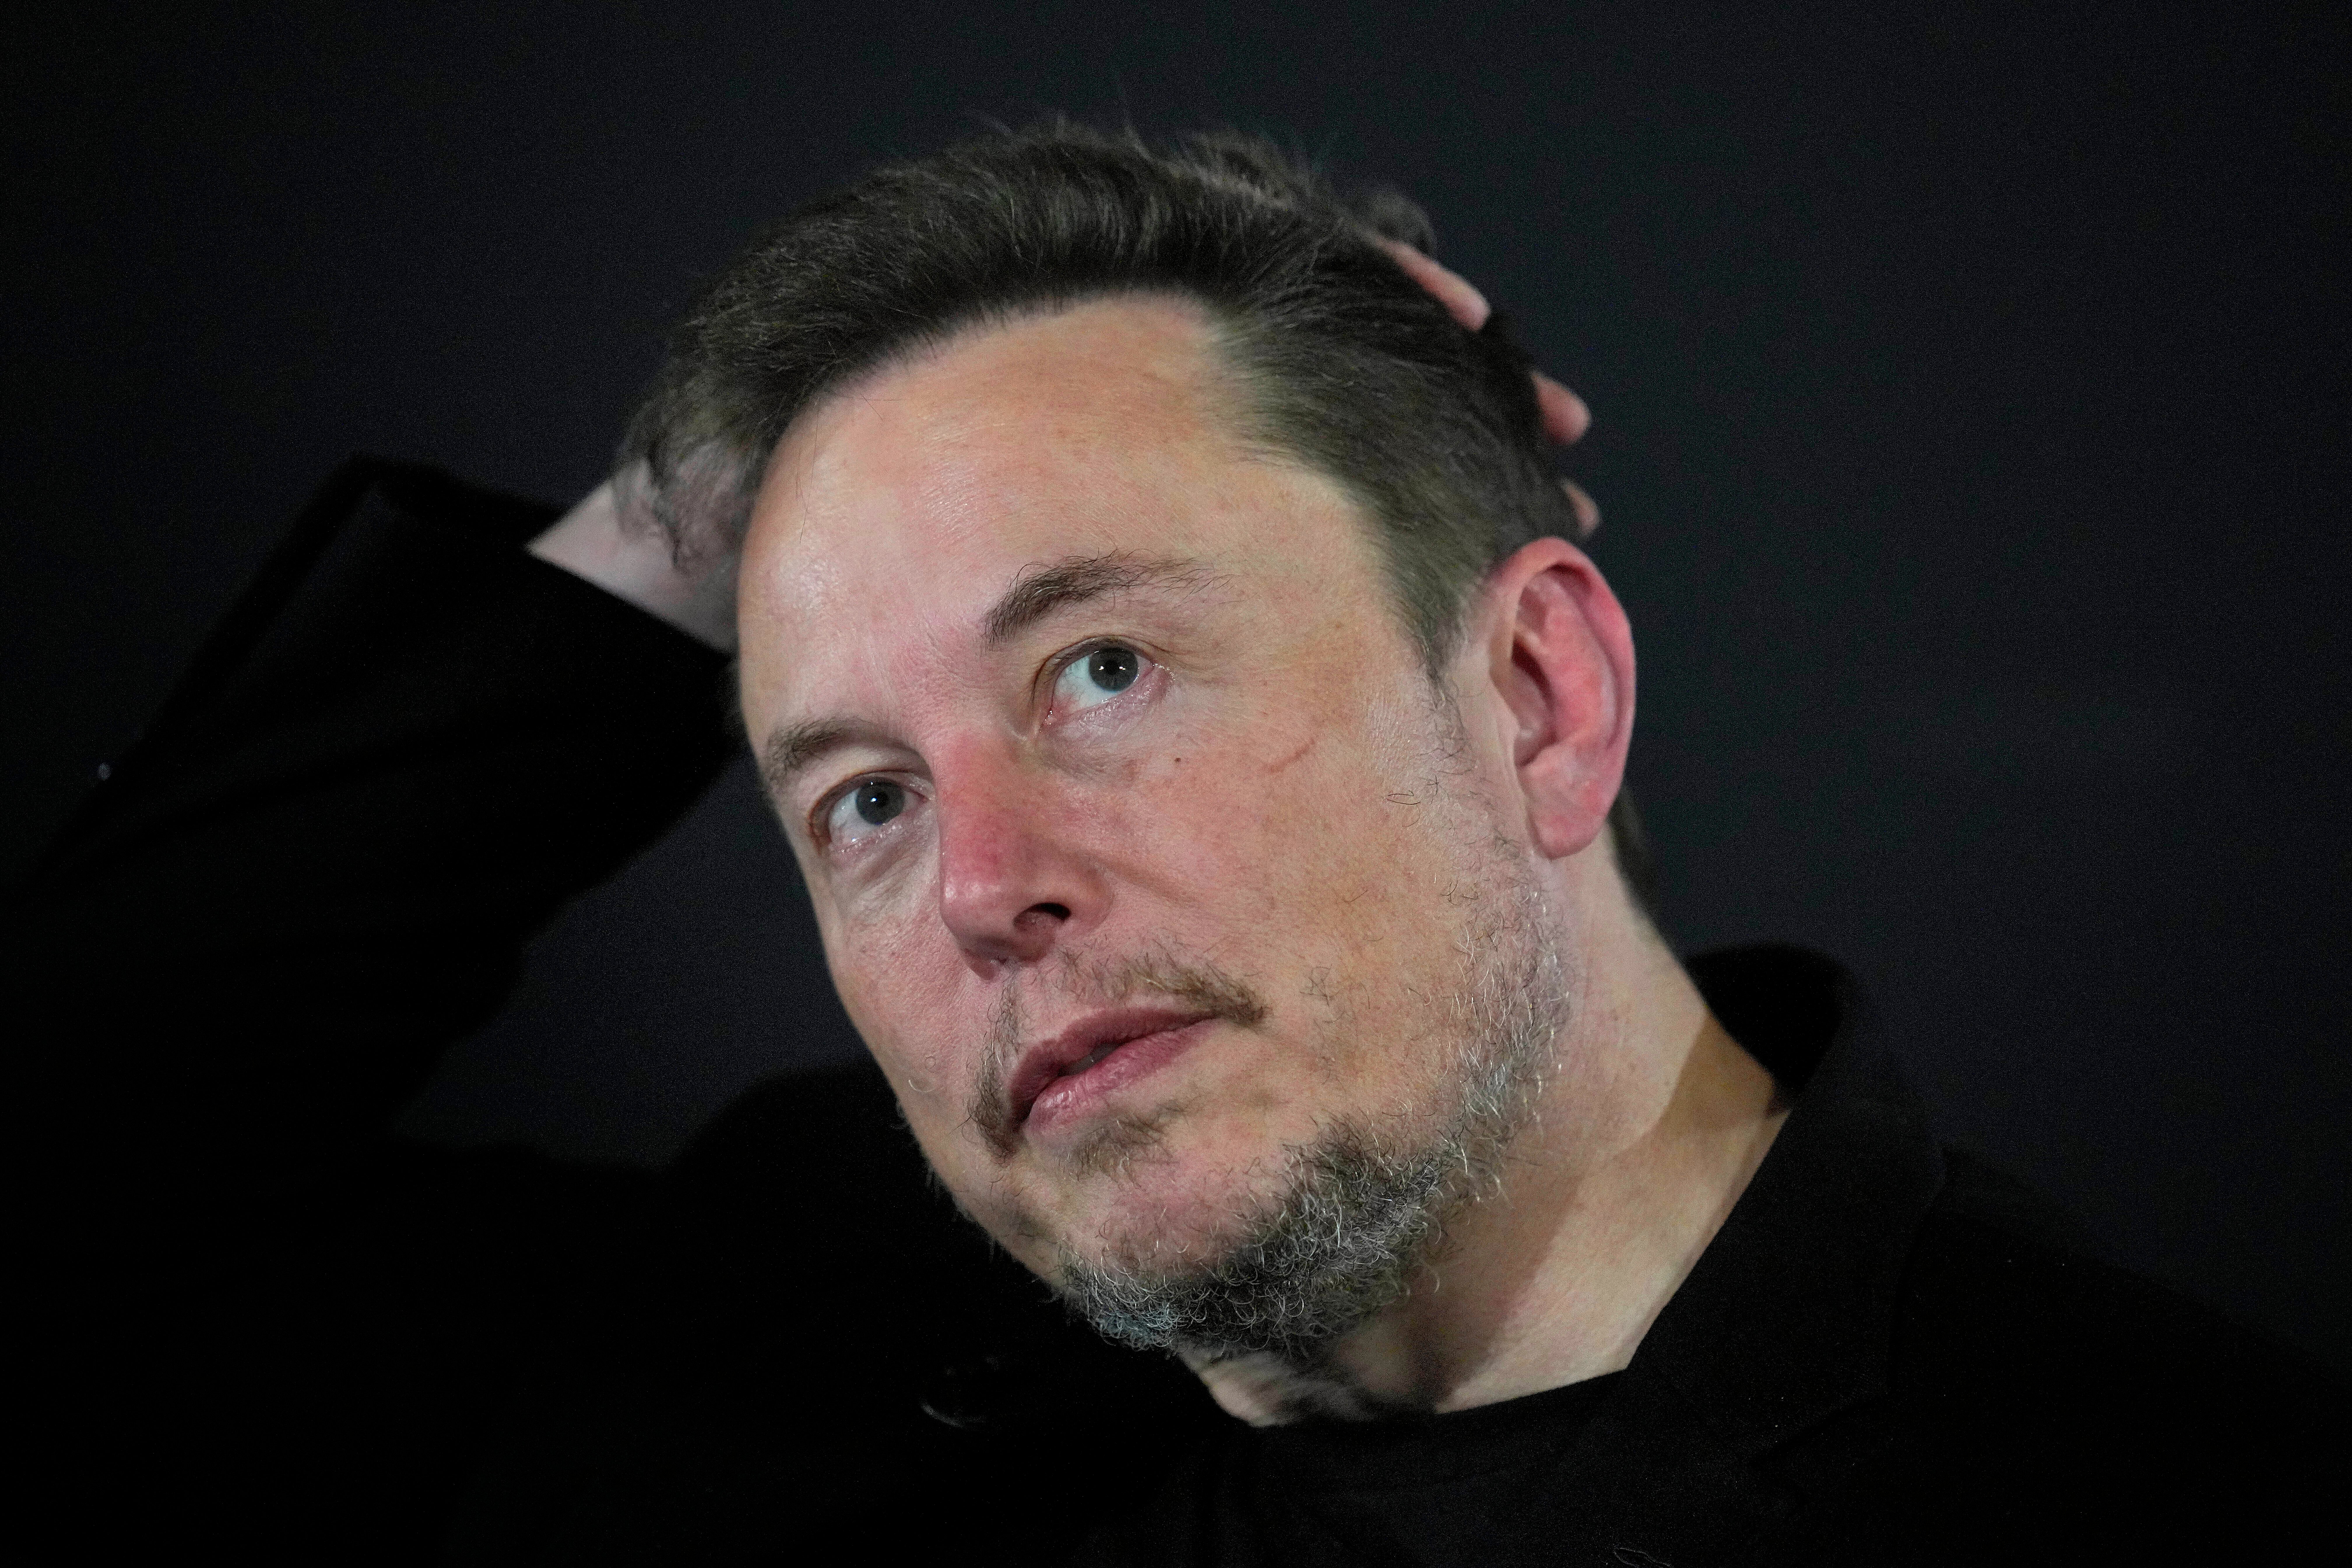 Musk rebuffed: The Tesla boss has seen his pay package struck down